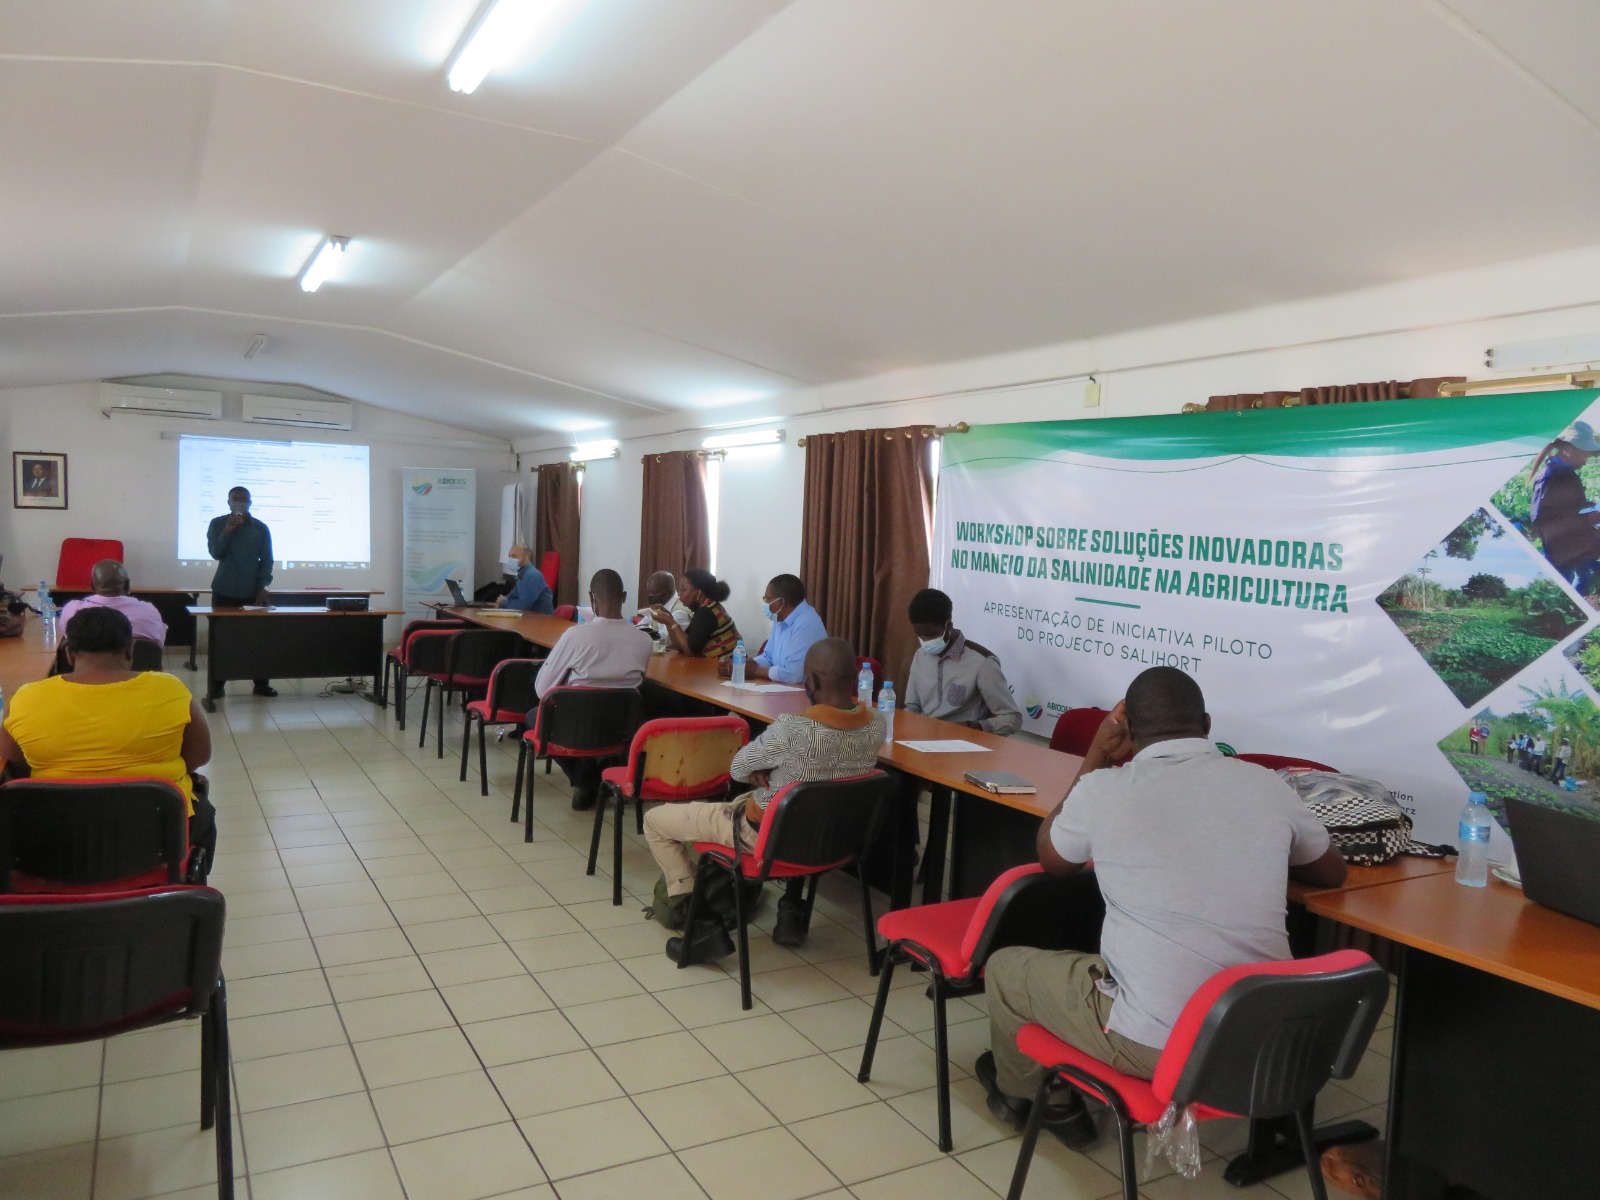 Technical workshops for knowledge exchange between different stakeholders from science, civil society, and agricultural extension.